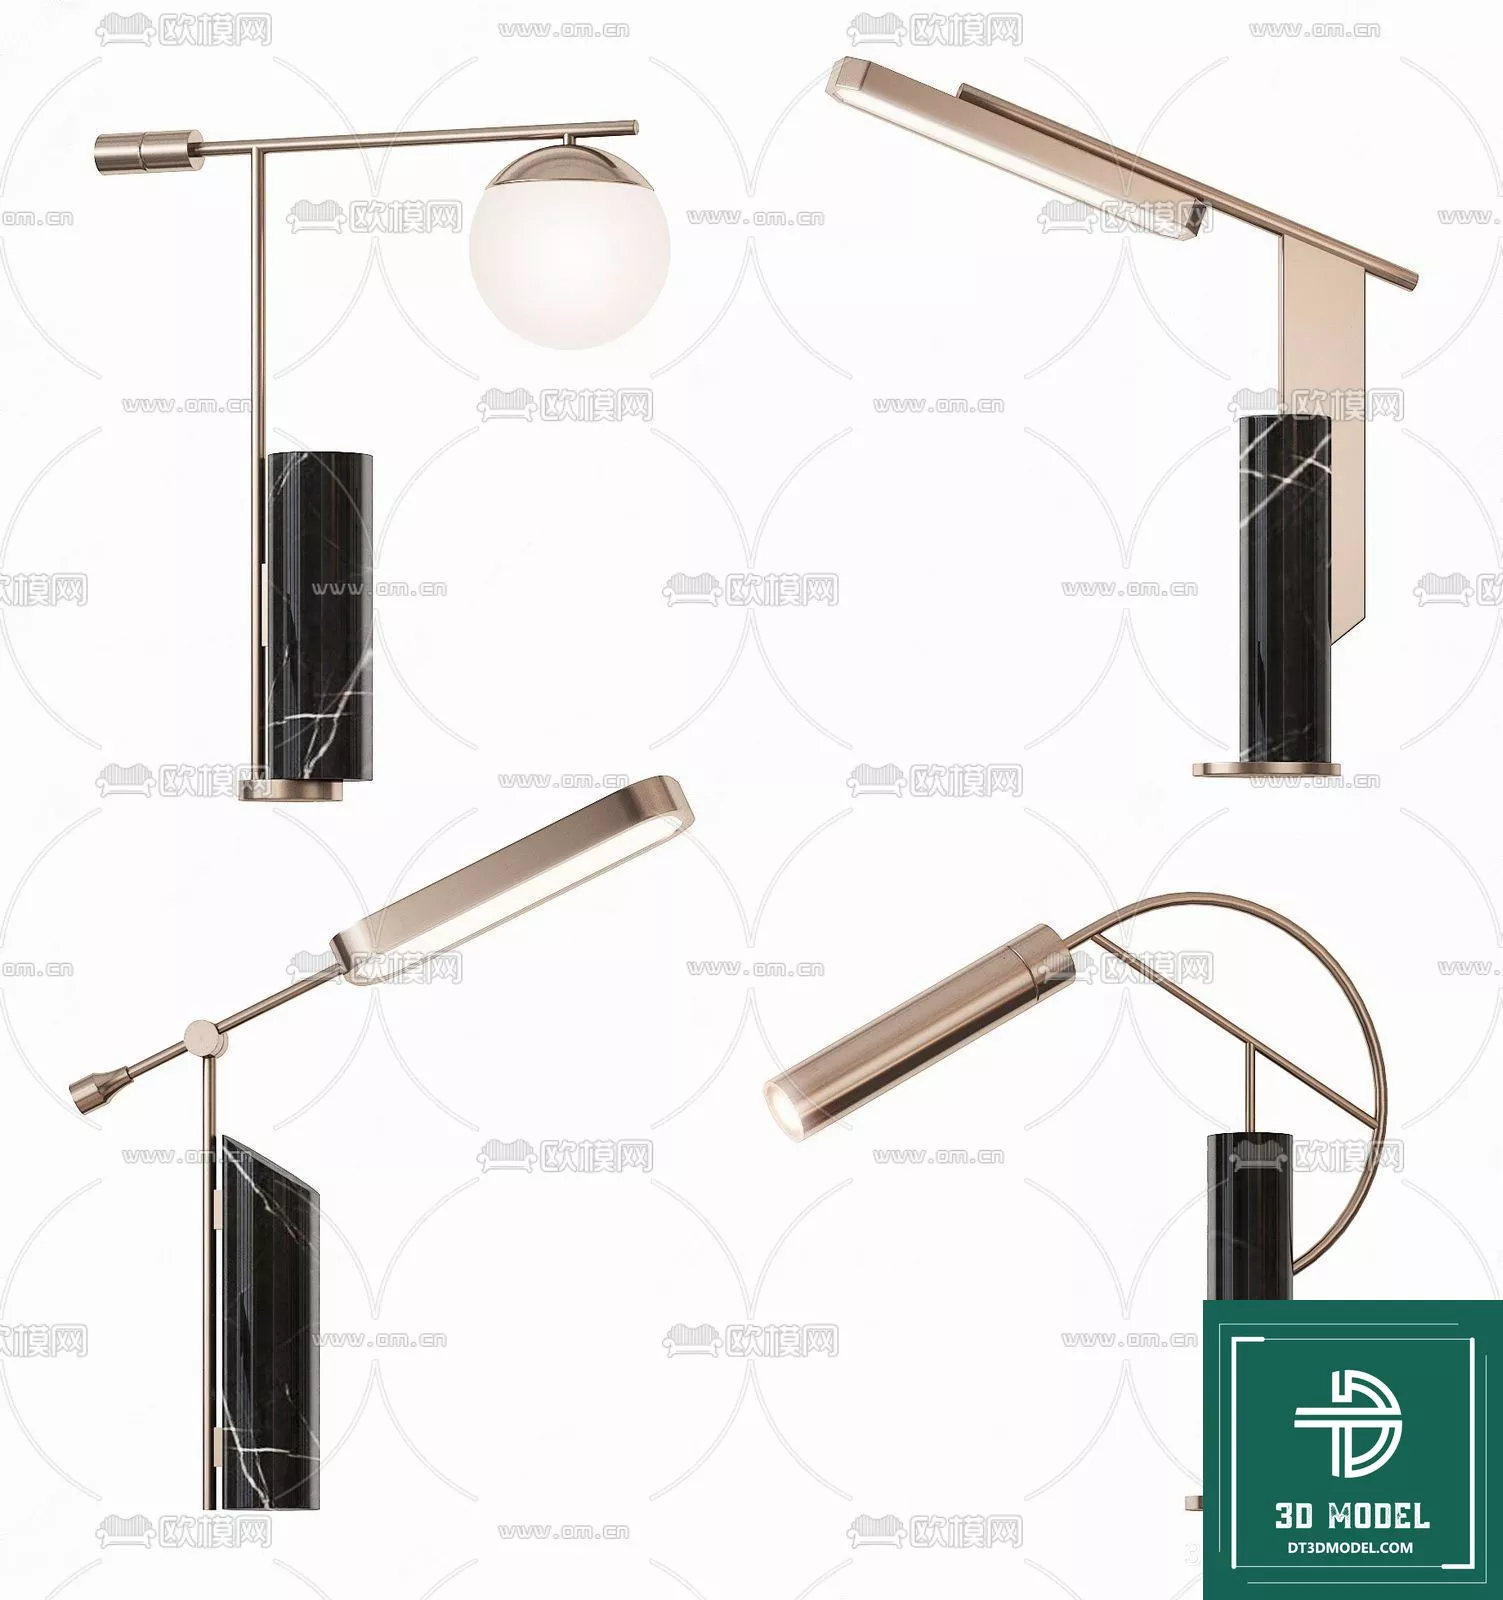 MODERN TABLE LAMP - SKETCHUP 3D MODEL - VRAY OR ENSCAPE - ID14623